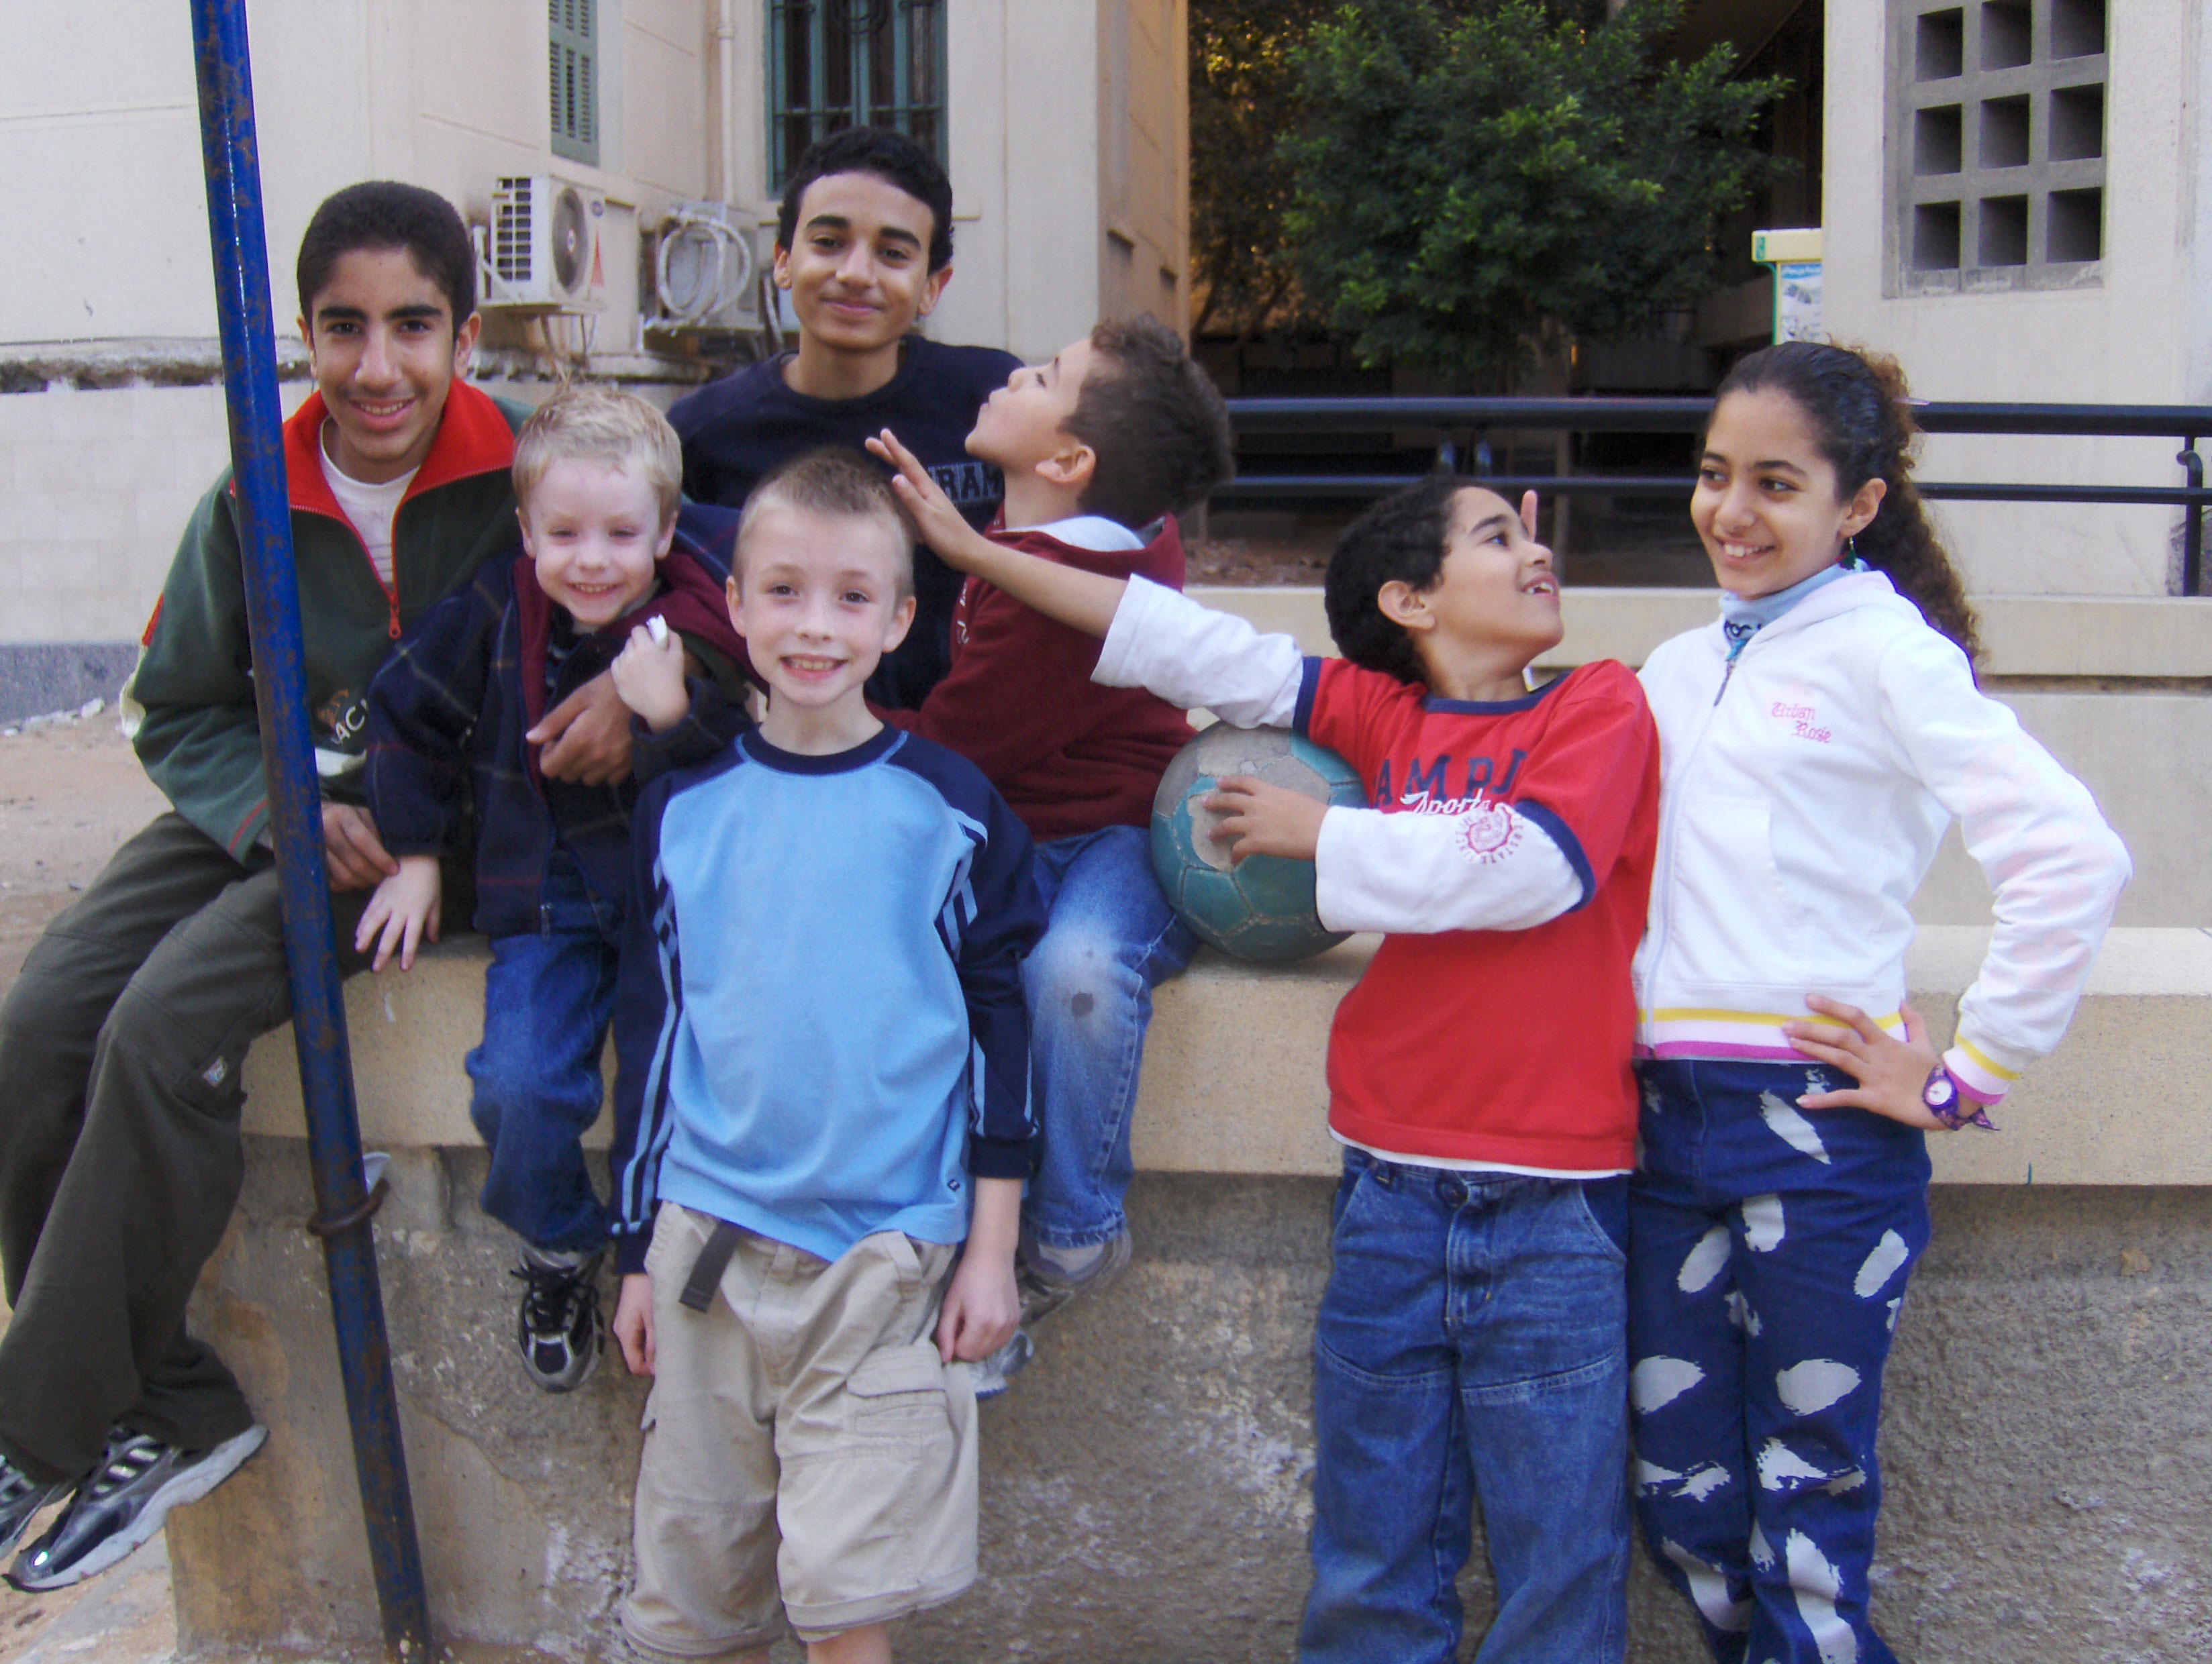 “The seminary kids” at ETSC in 2006